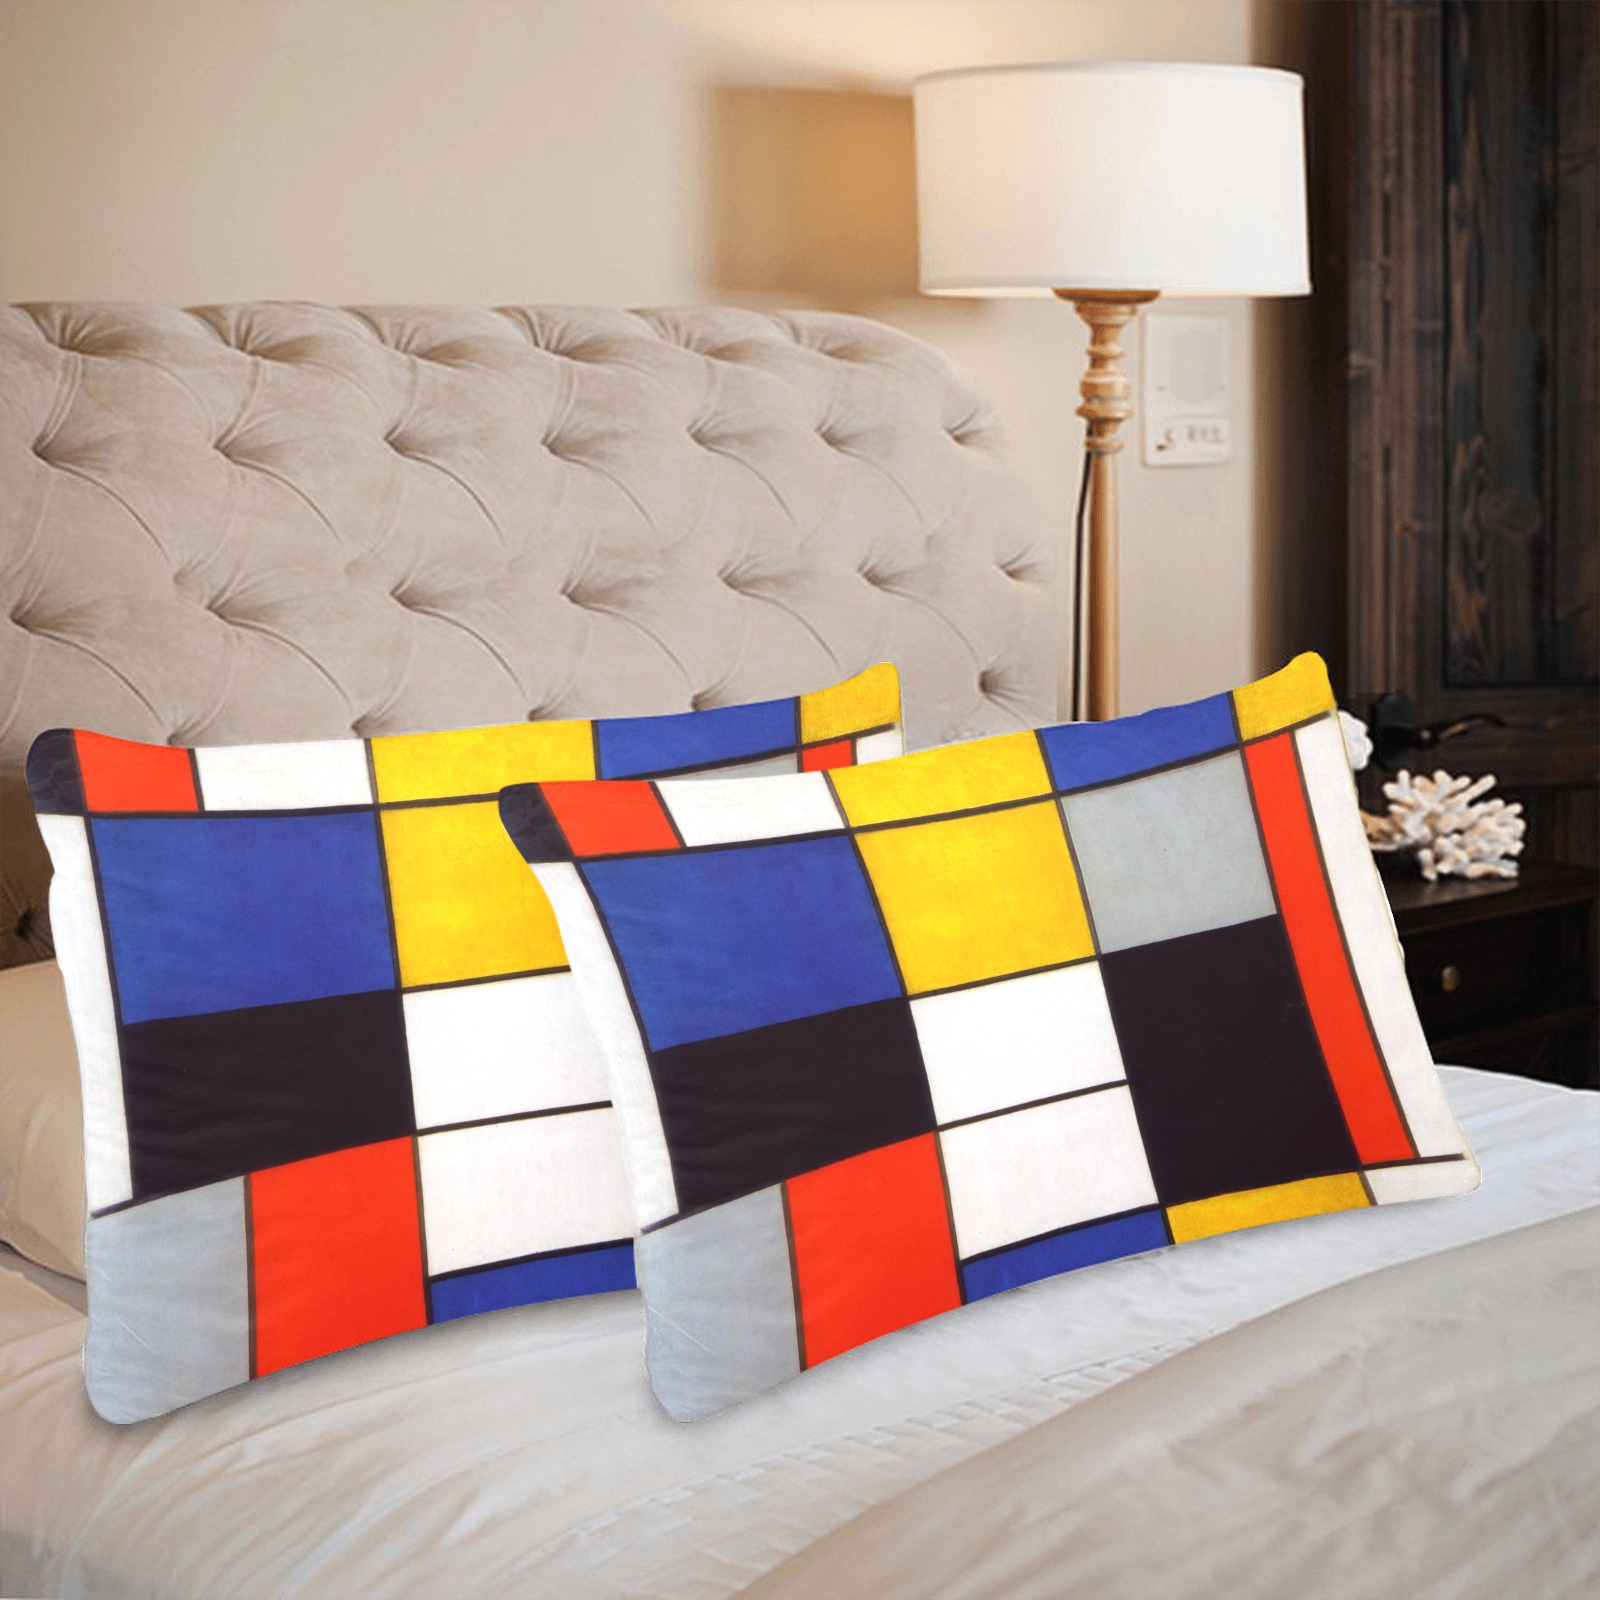 Composition A by Piet Mondrian Custom Pillow Case 20"x 30" (One Side) (Set of 2)